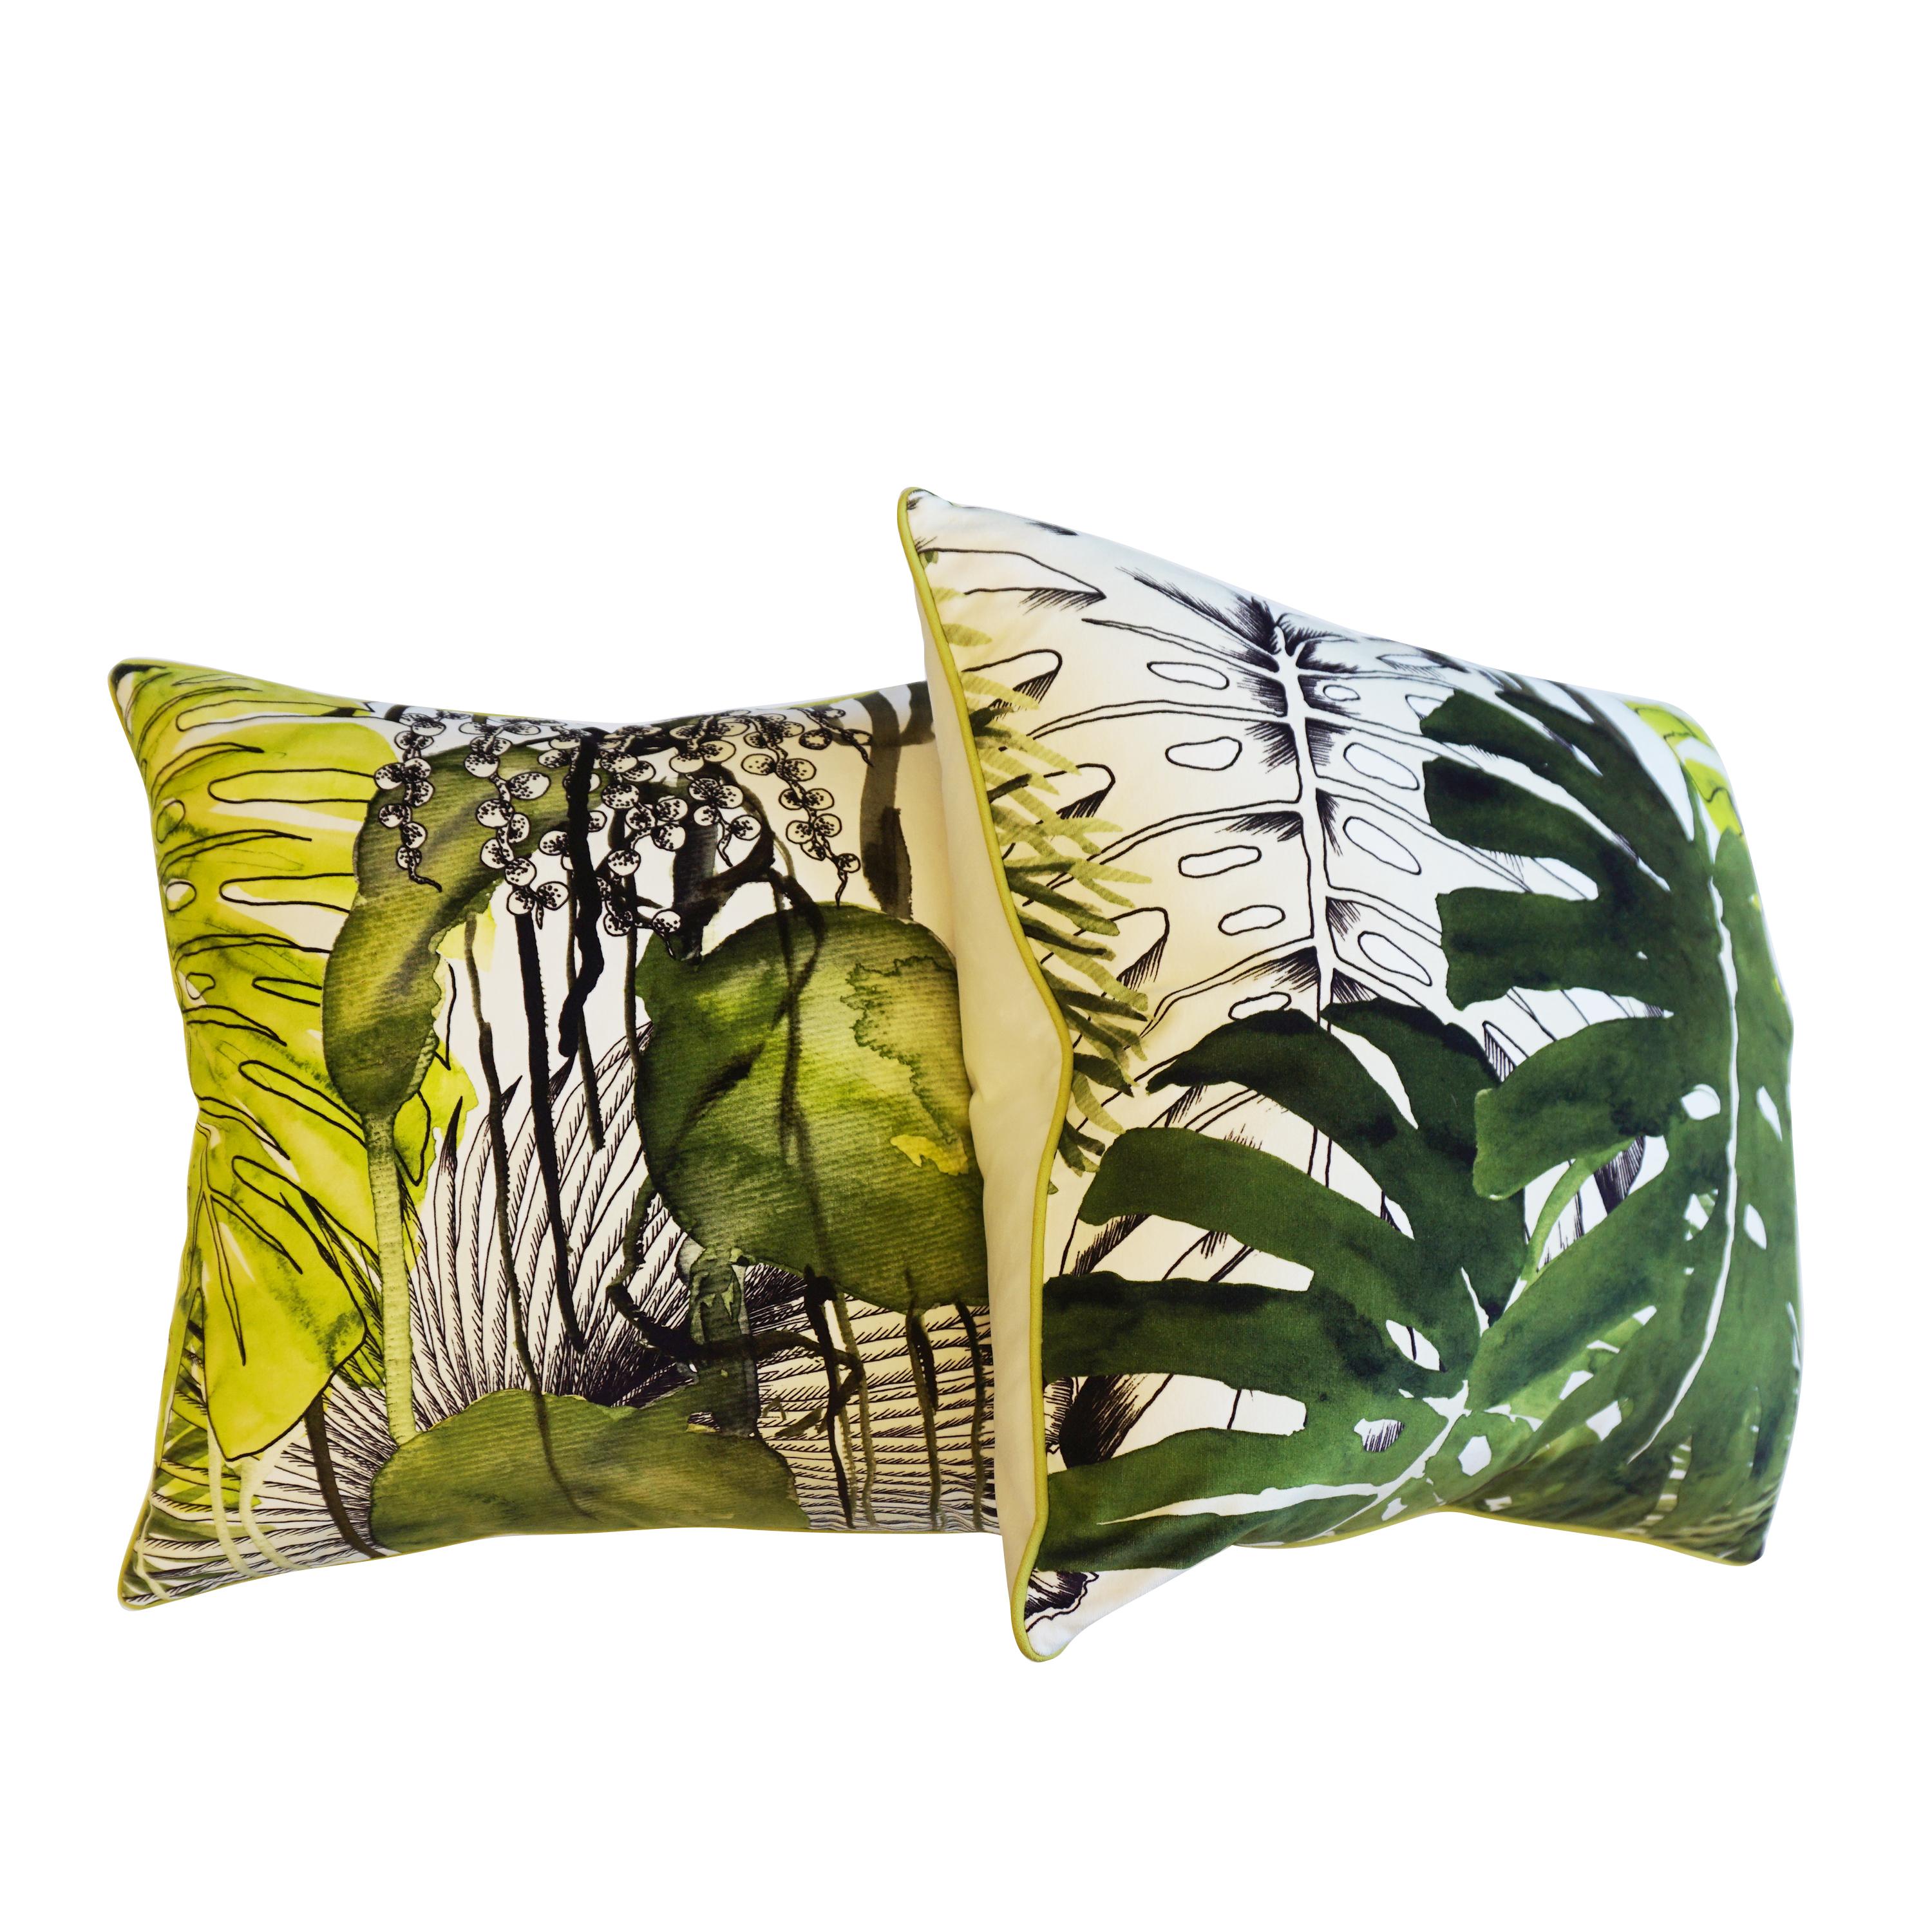 A pair of throw pillows hand sewn in palm tree Christian Lacroix fabric. Each pillow is accented with lime green piping and the back is white velvet. All pillows are hand sewn at our studio in Norwalk, CT.

Measurements

24” H x 24” W.